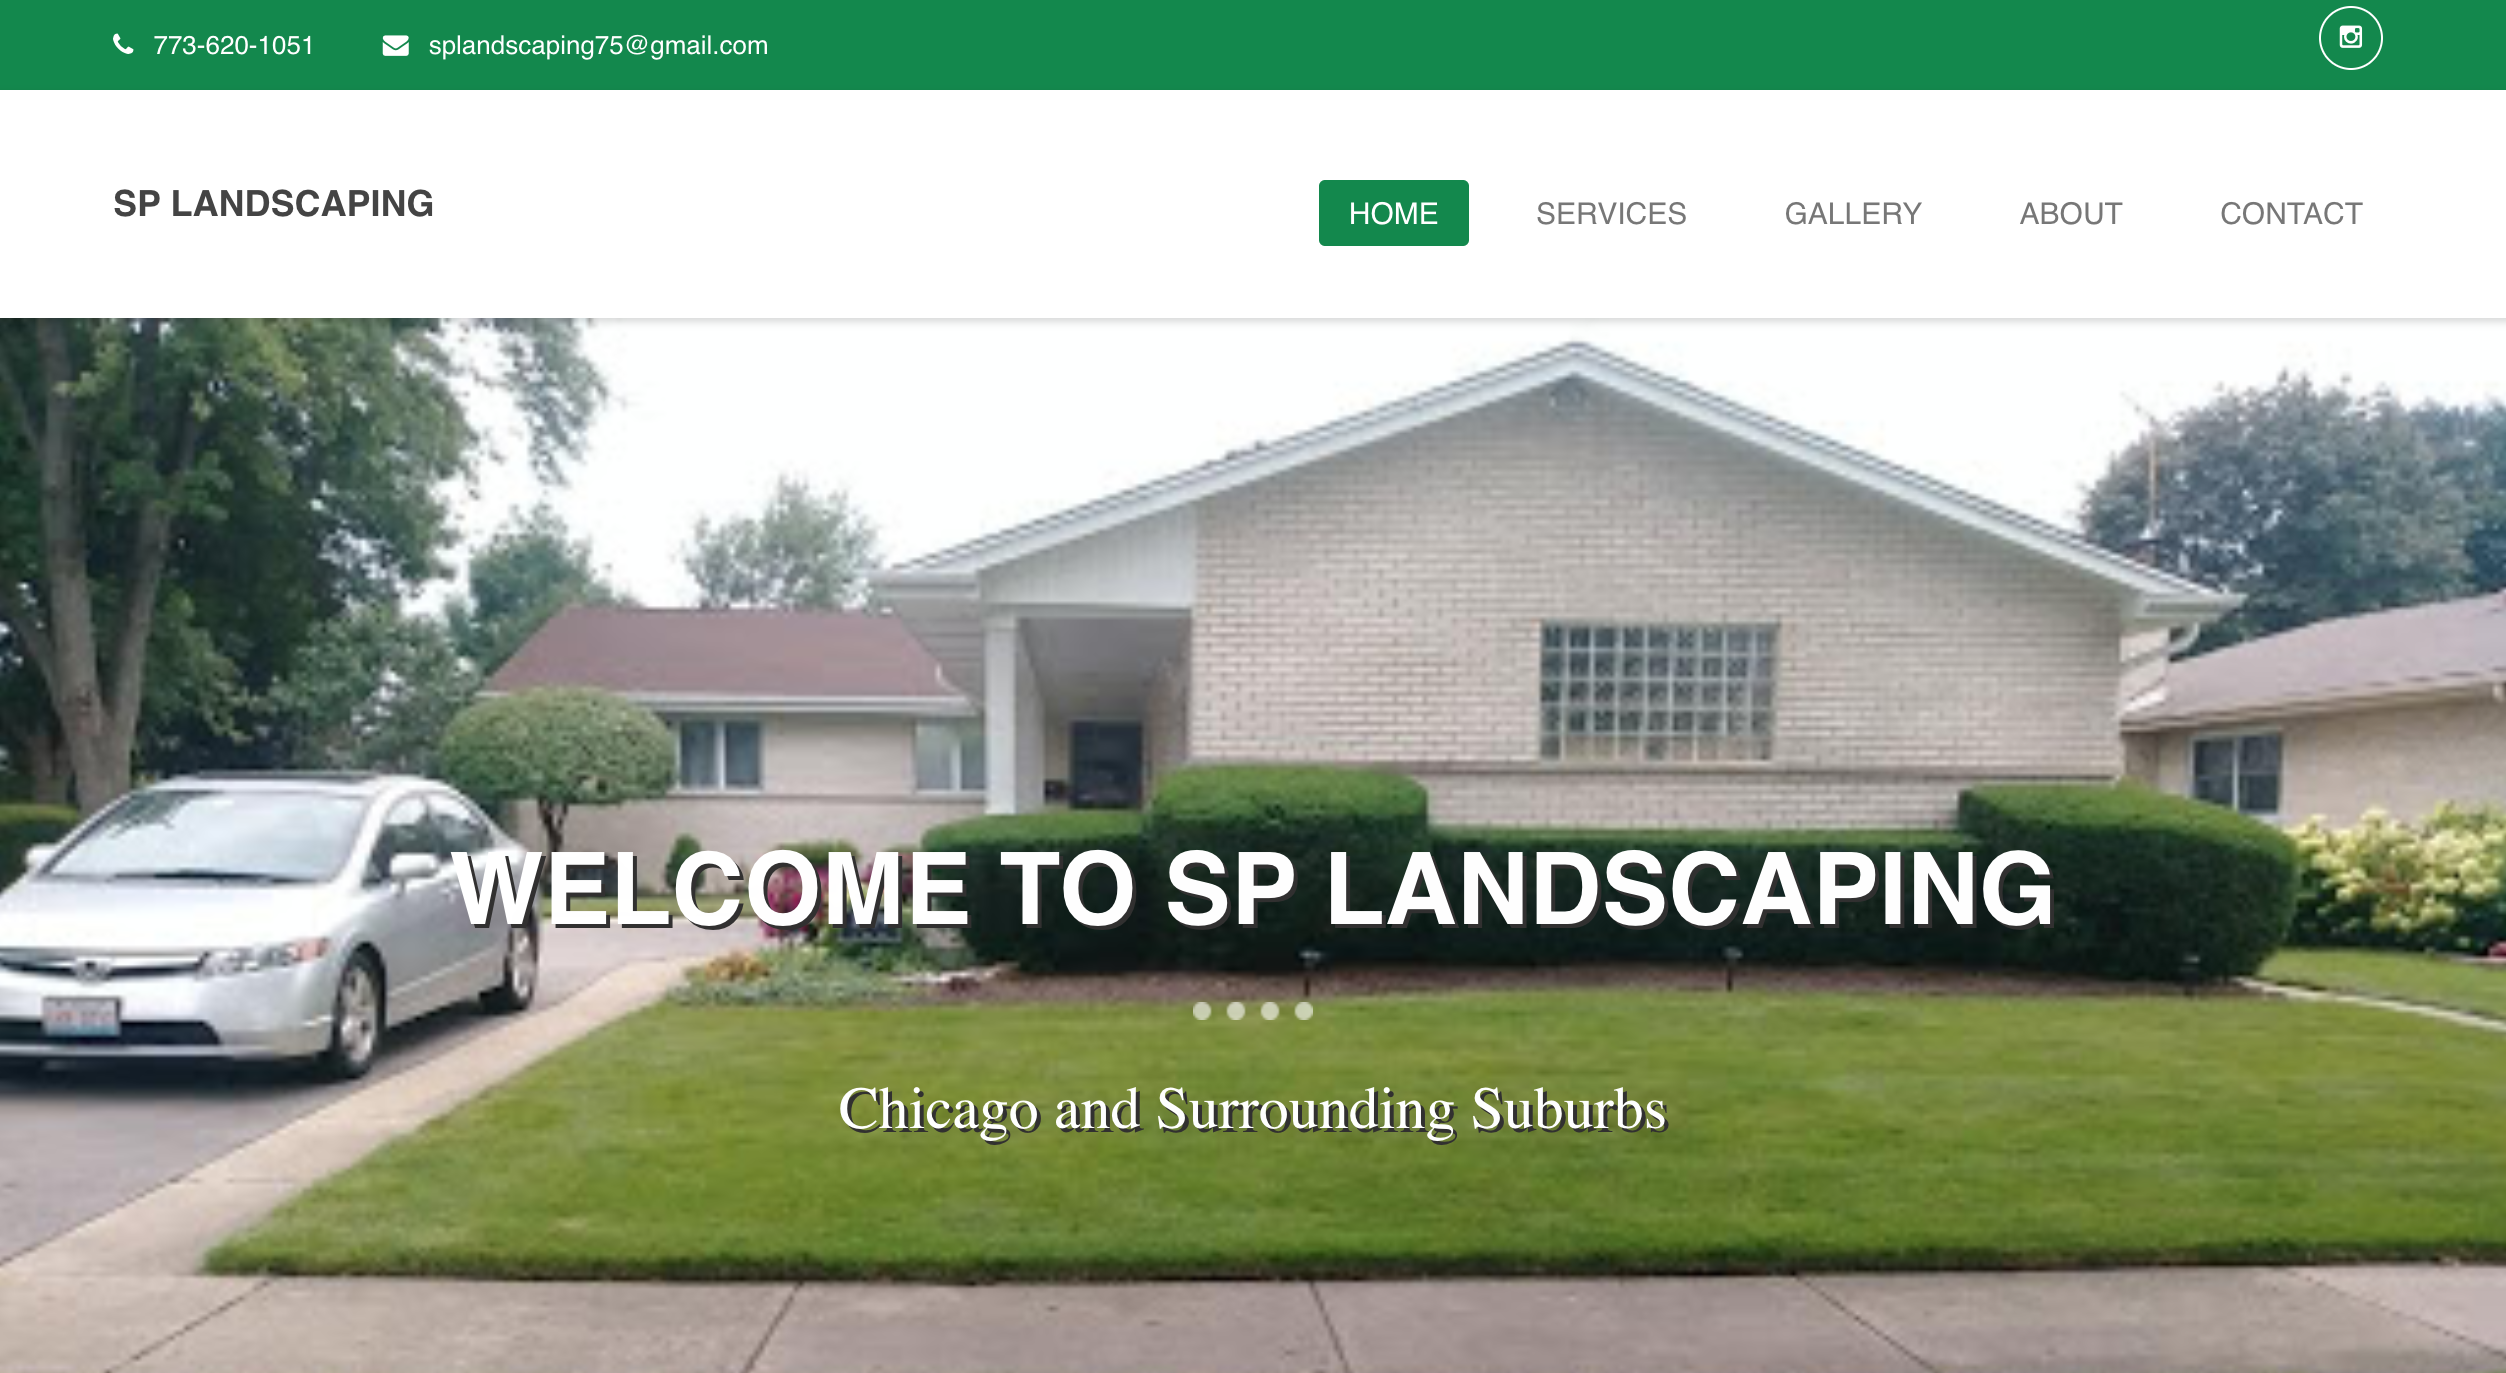 Feature project SP Landscaping